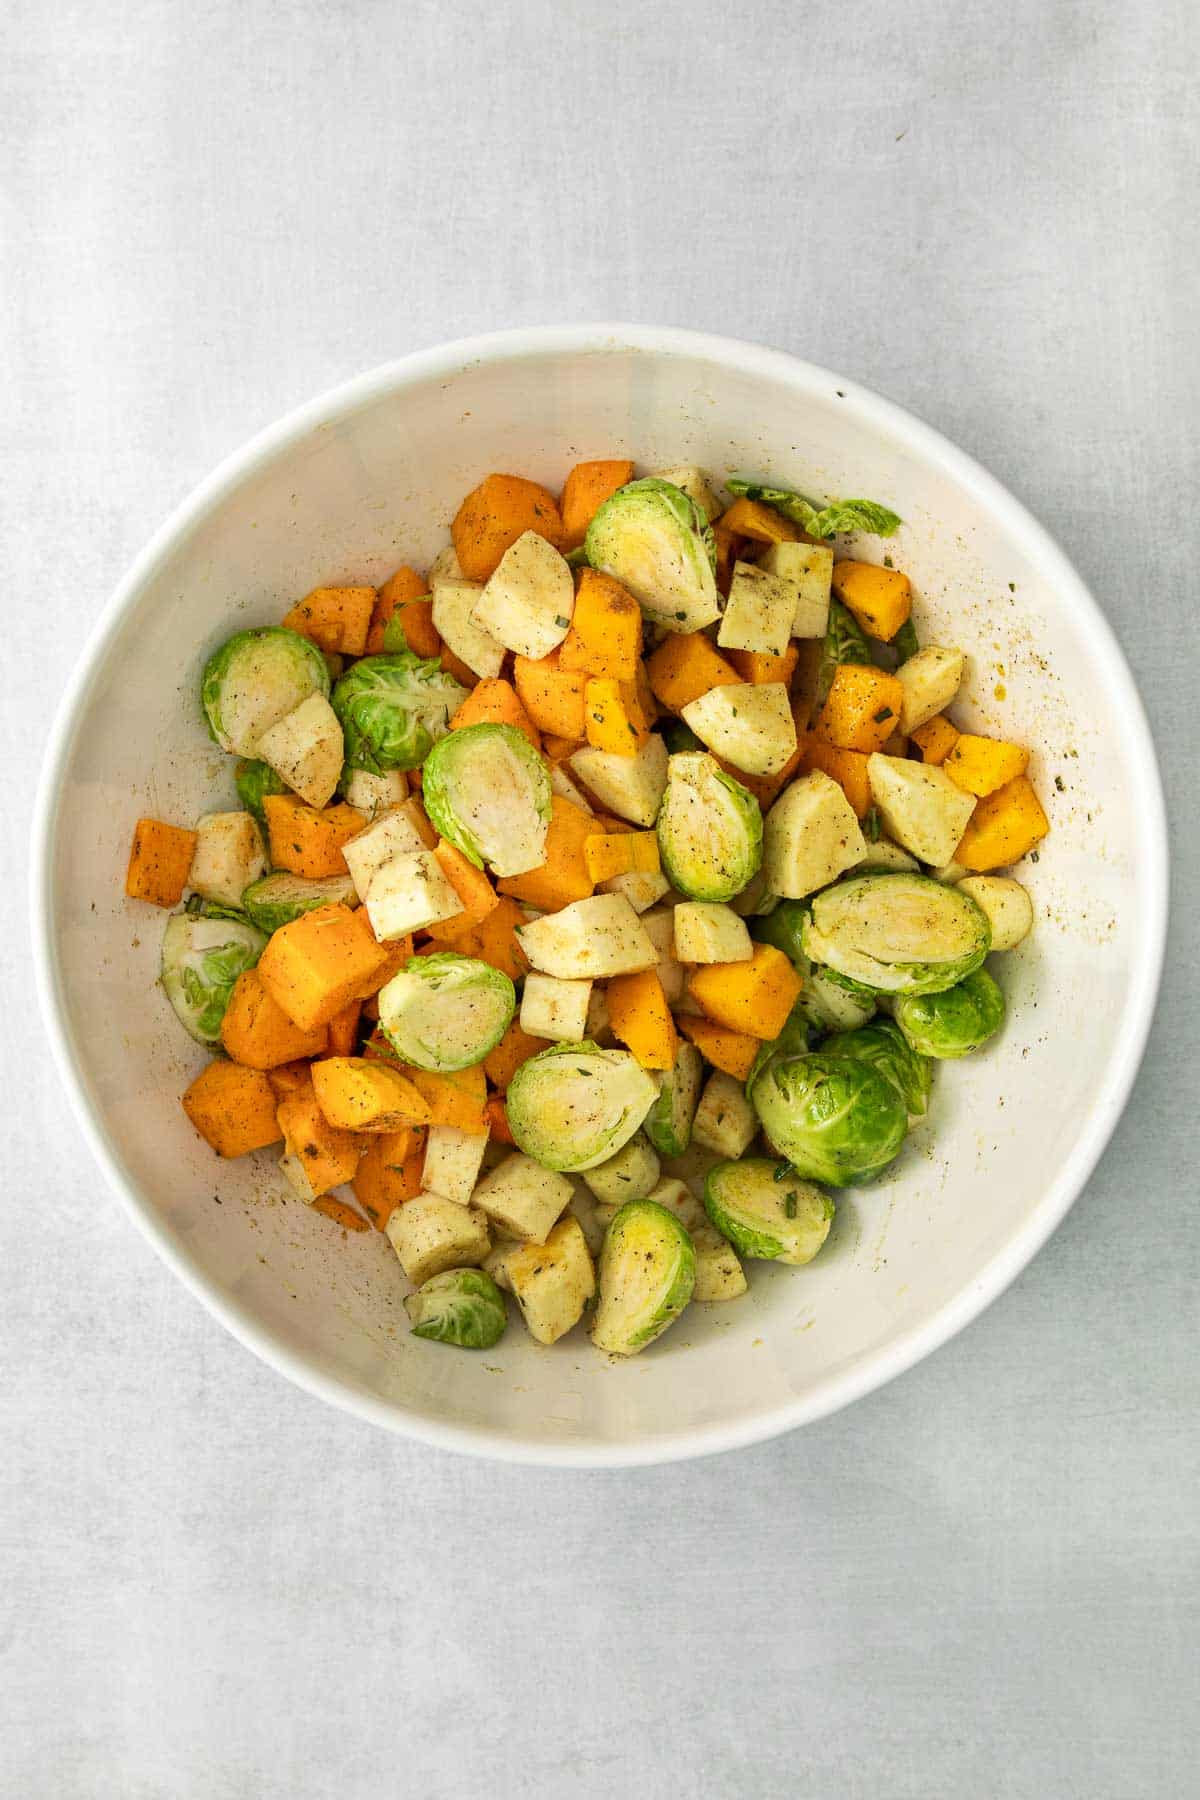 white bowl with brussel sprouts, parsnips and butternut squash cubed and tossed in oil and spices.